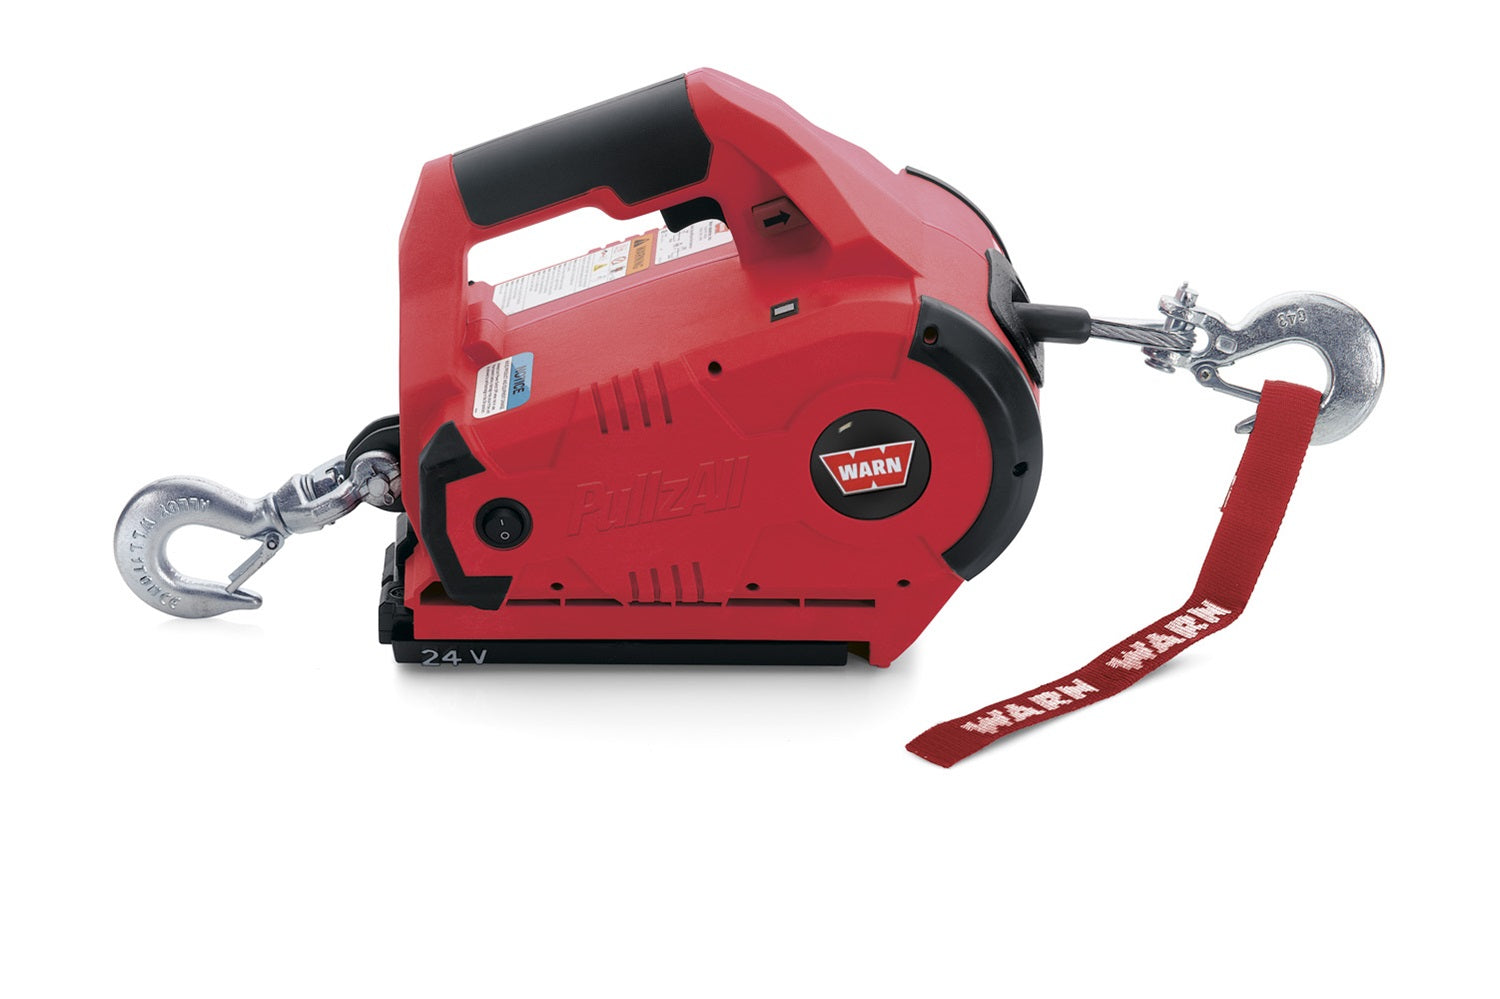 WARN 885005 PullzAll Cordless 24V DC Portable Electric Winch with Steel Cable and 2 Rechargeable Battery Packs: 1/2 Ton (1,000 lb) Pulling Capacity, red